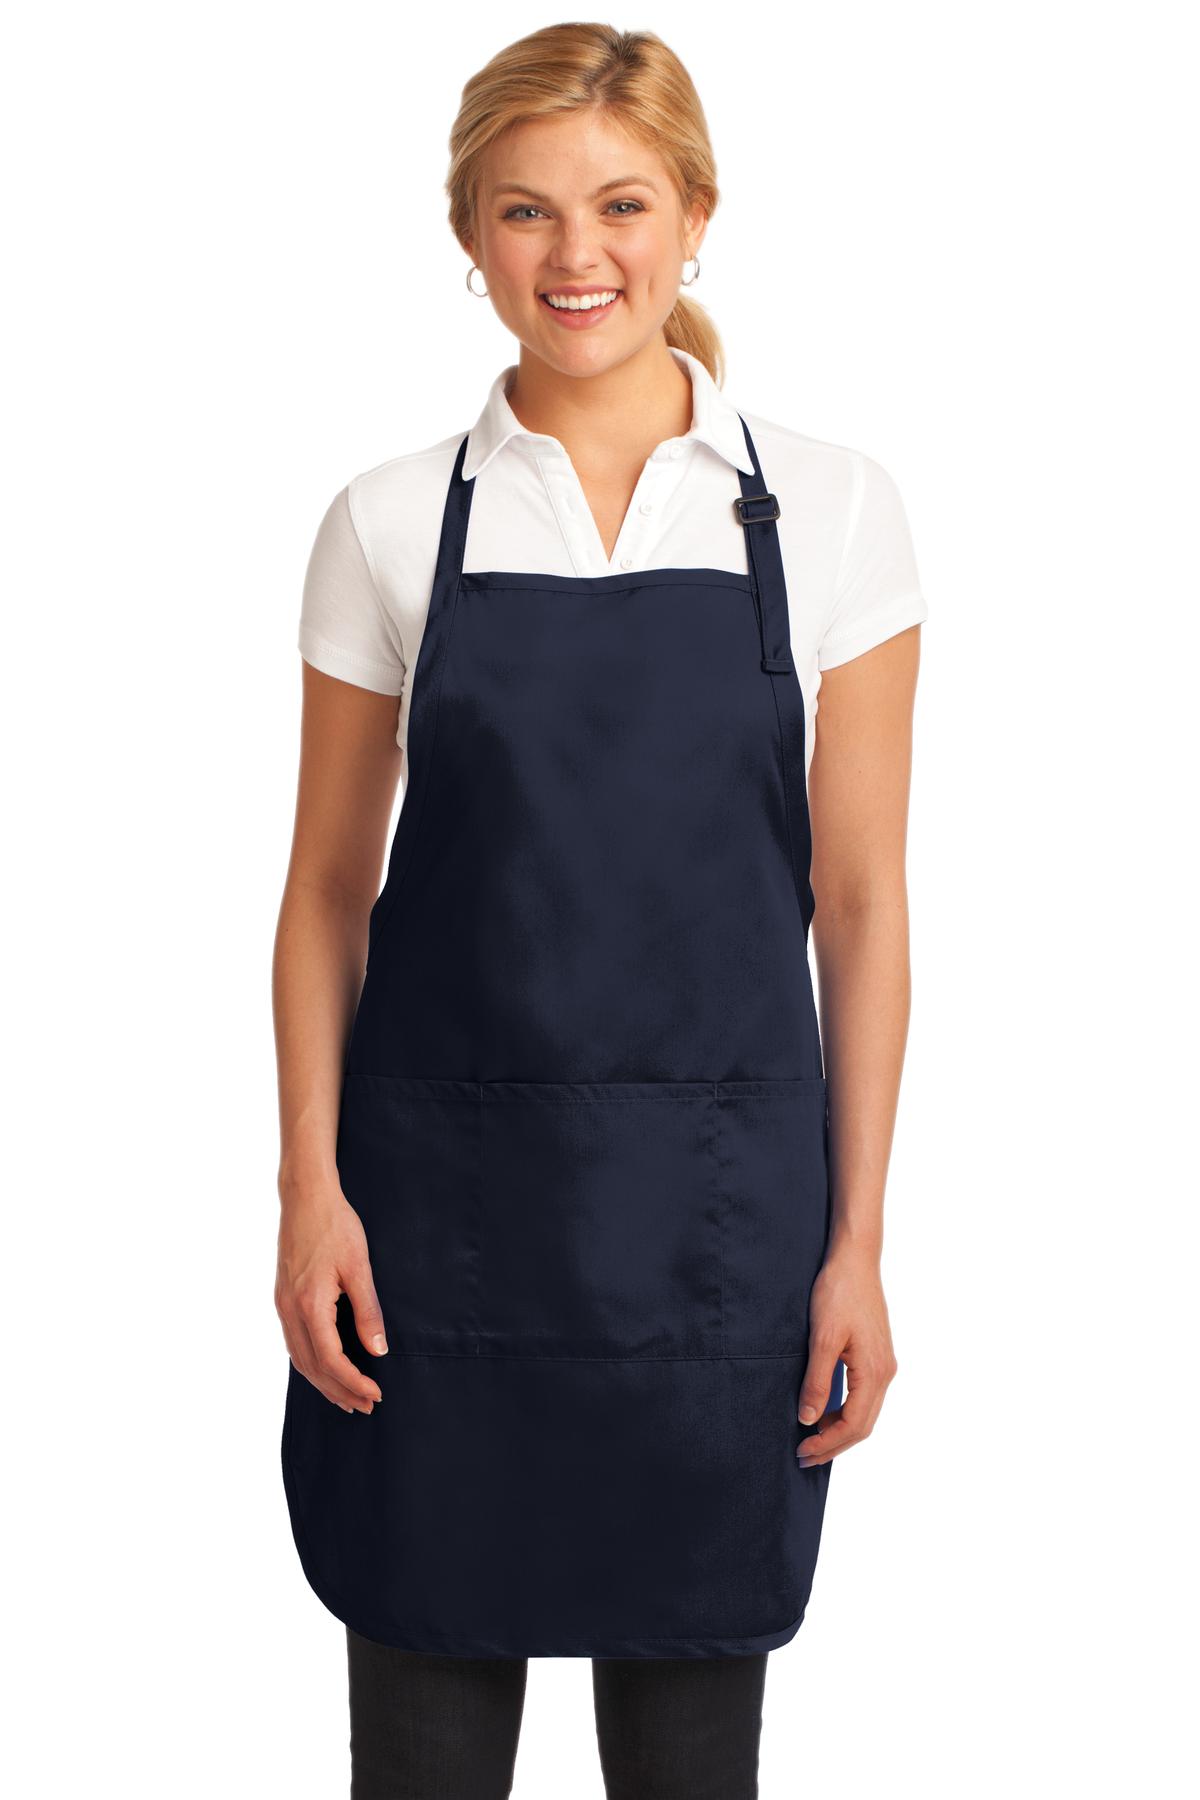 Port Authority Easy Care Full-Length Apron with Stain Release. A703